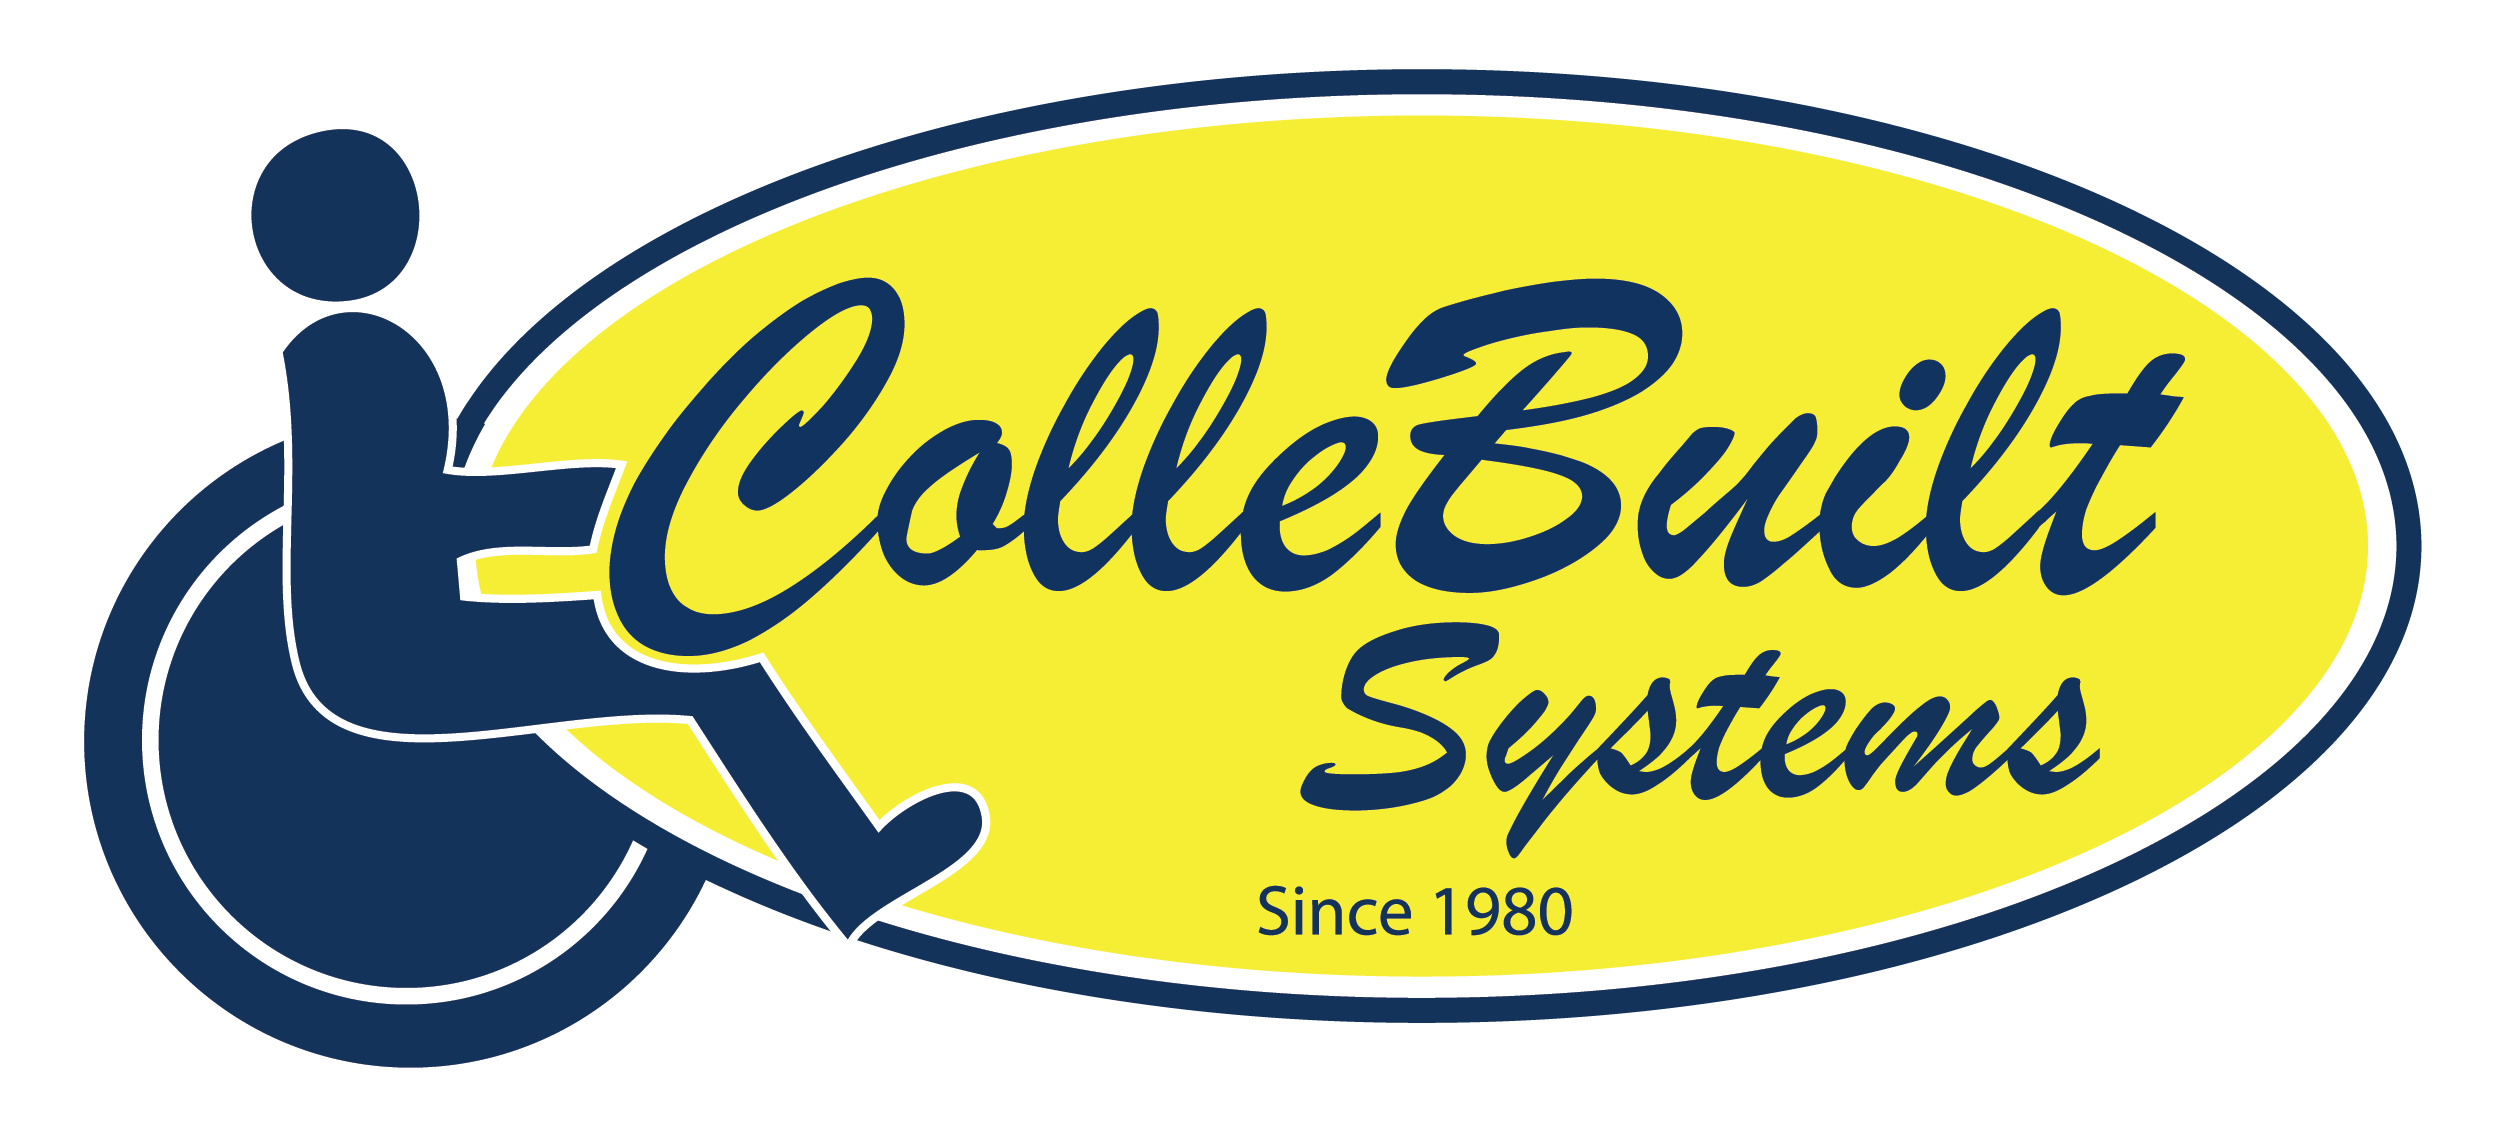 ColleBuilt Products